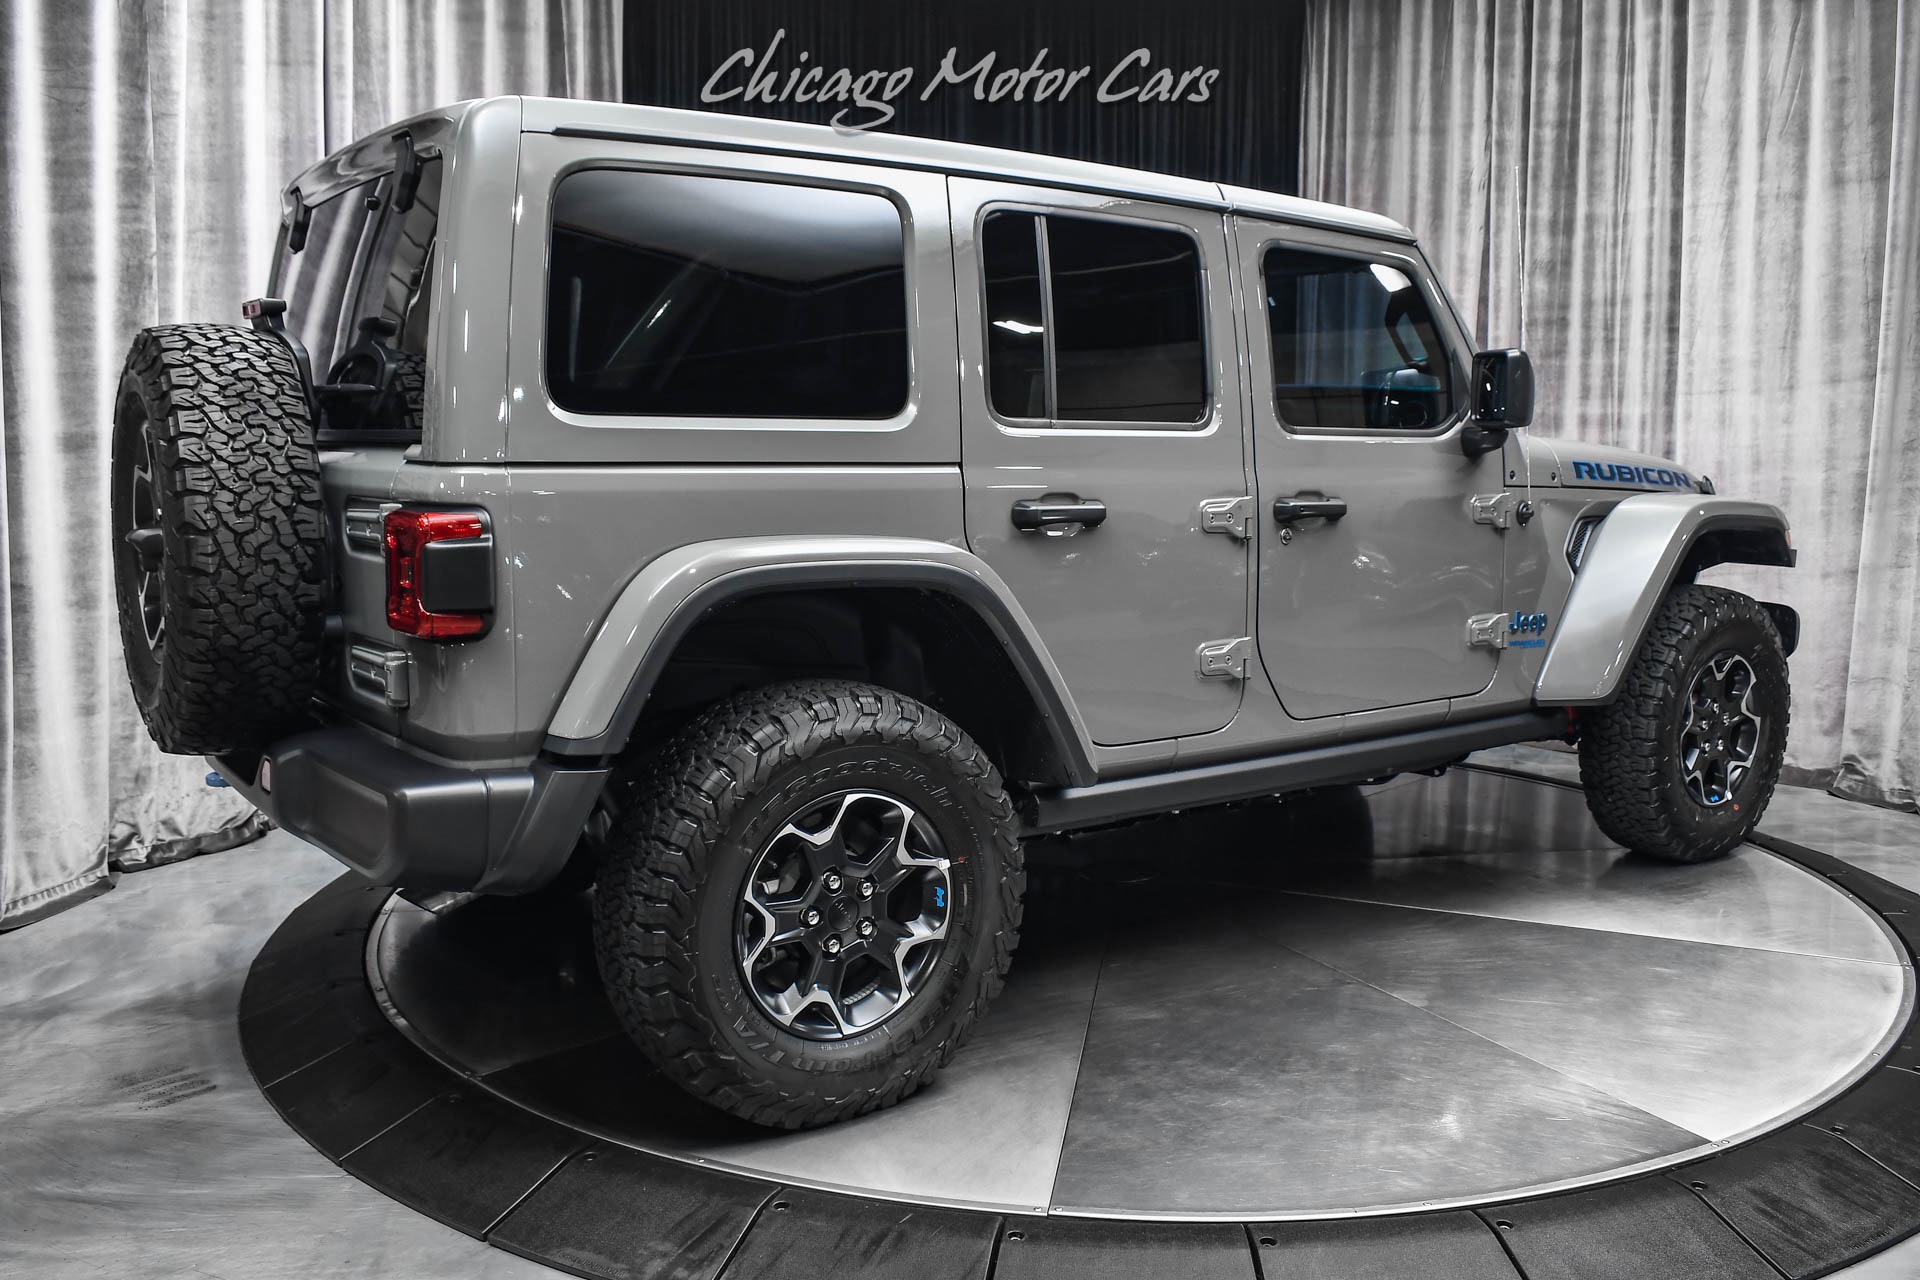 Used-2022-Jeep-Wrangler-Unlimited-Rubicon-4xe-RARE-COLOR-470TQ-PLUG-IN-HYBRID-HARDTOP-LEATHER-COLD-WEATHER